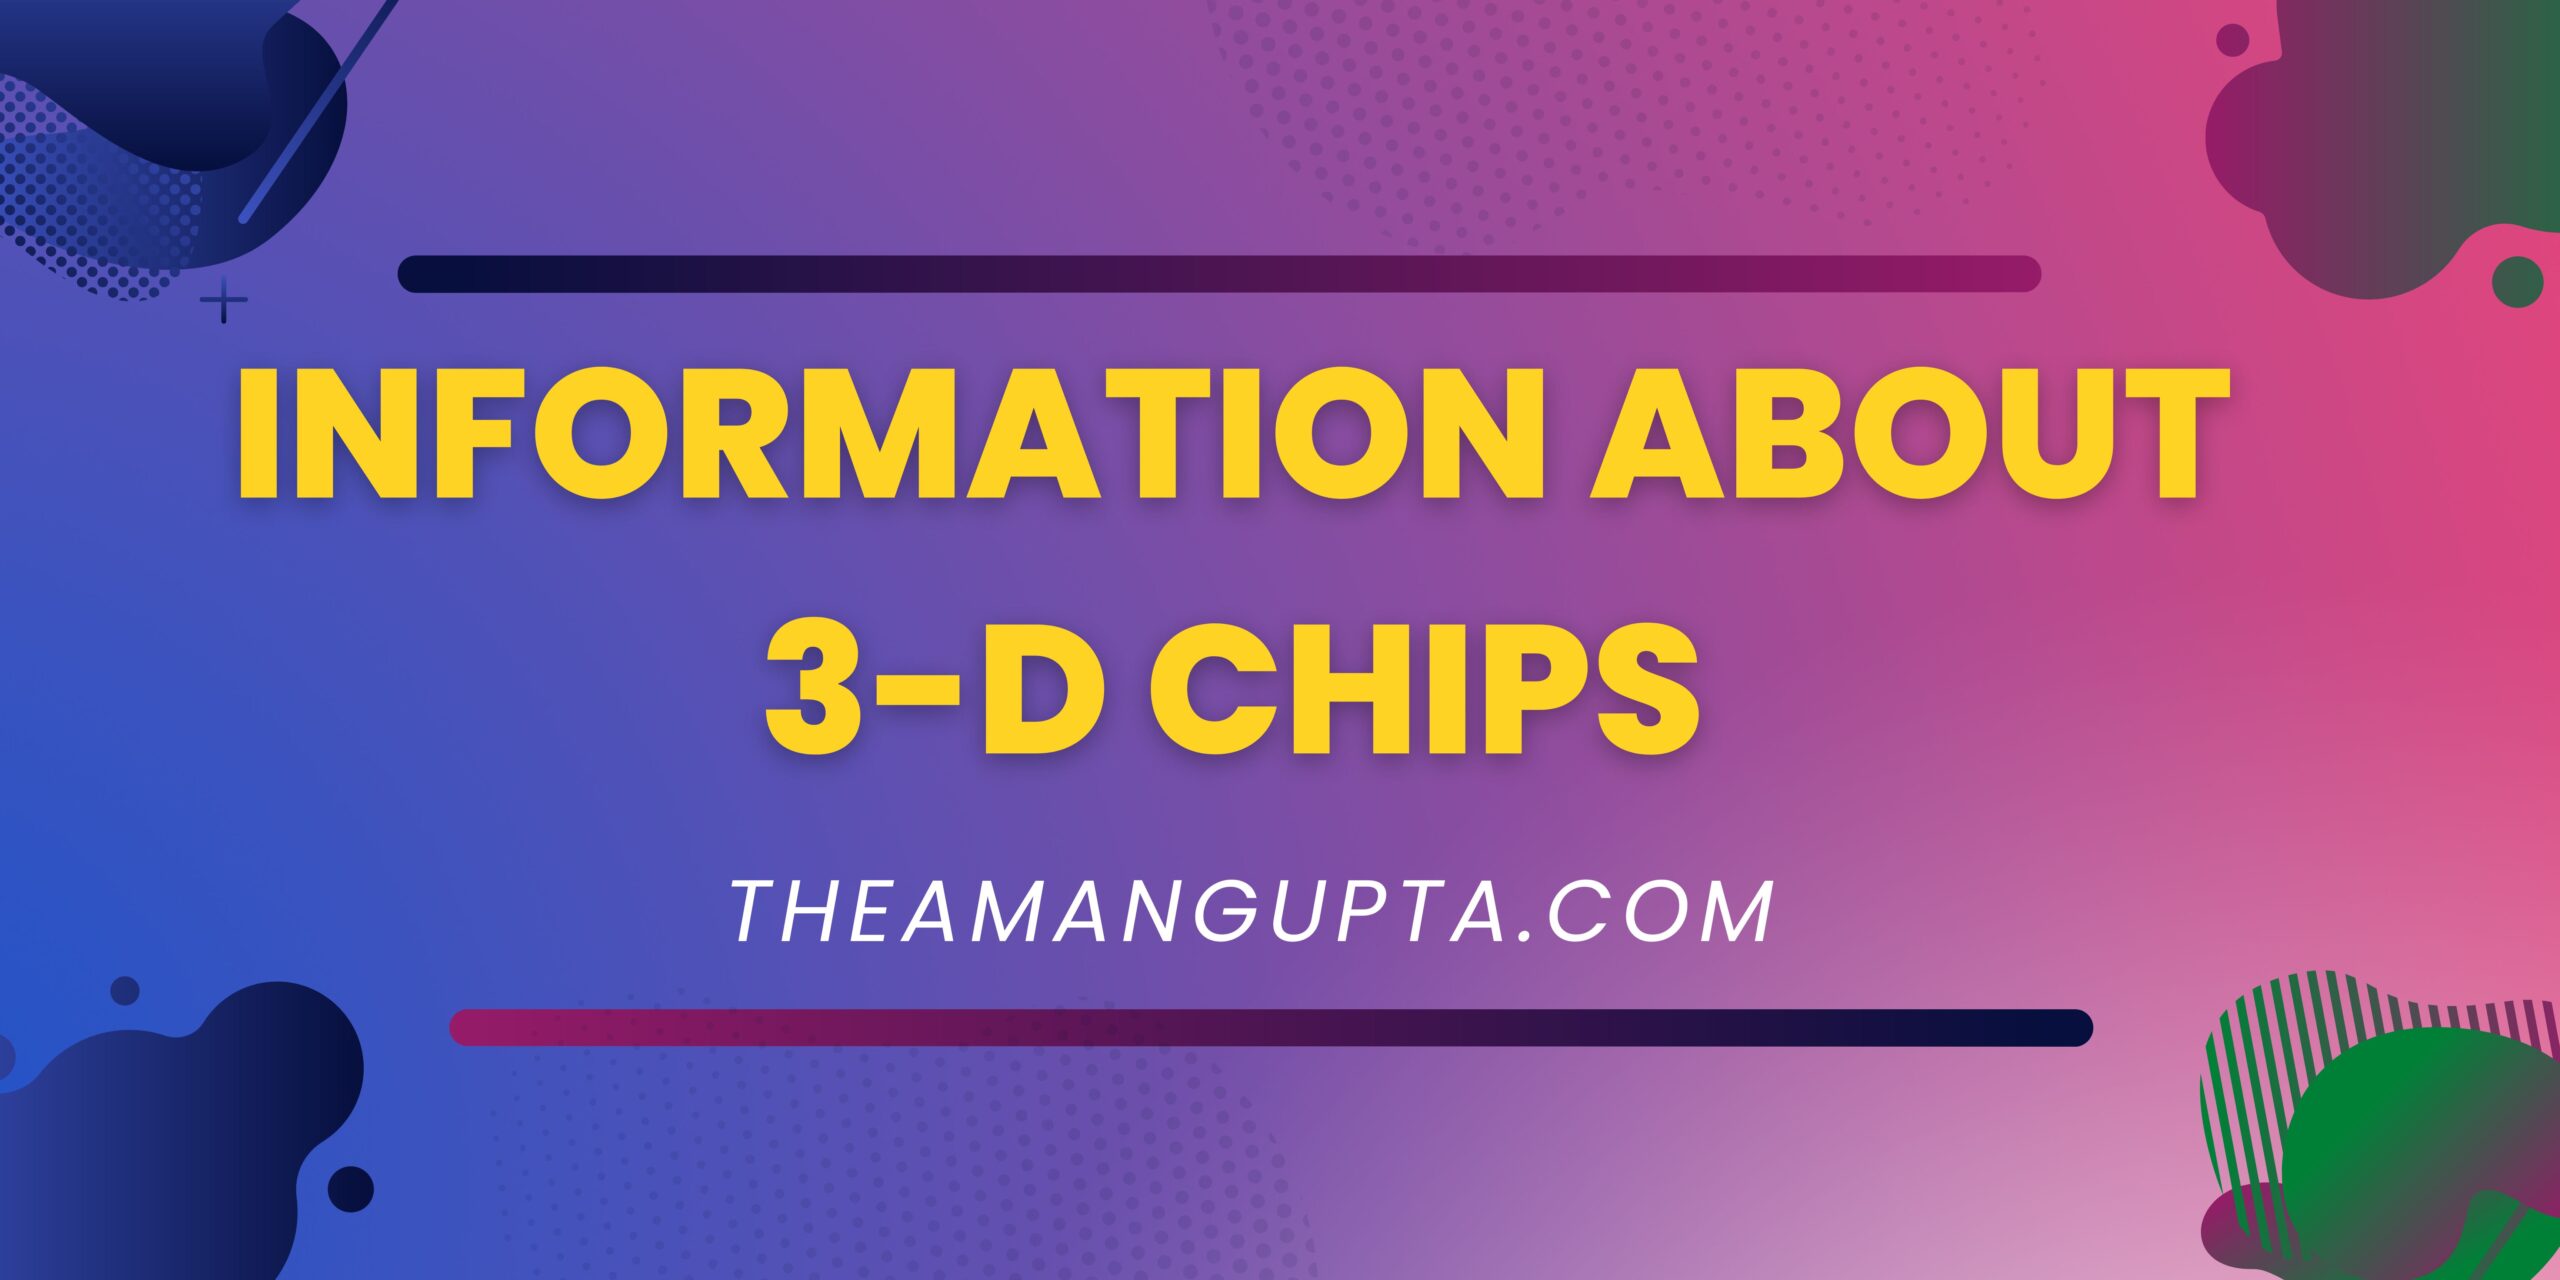 Information About 3-D Chips|3-D Chips|Tannu Rani|Theamangupta